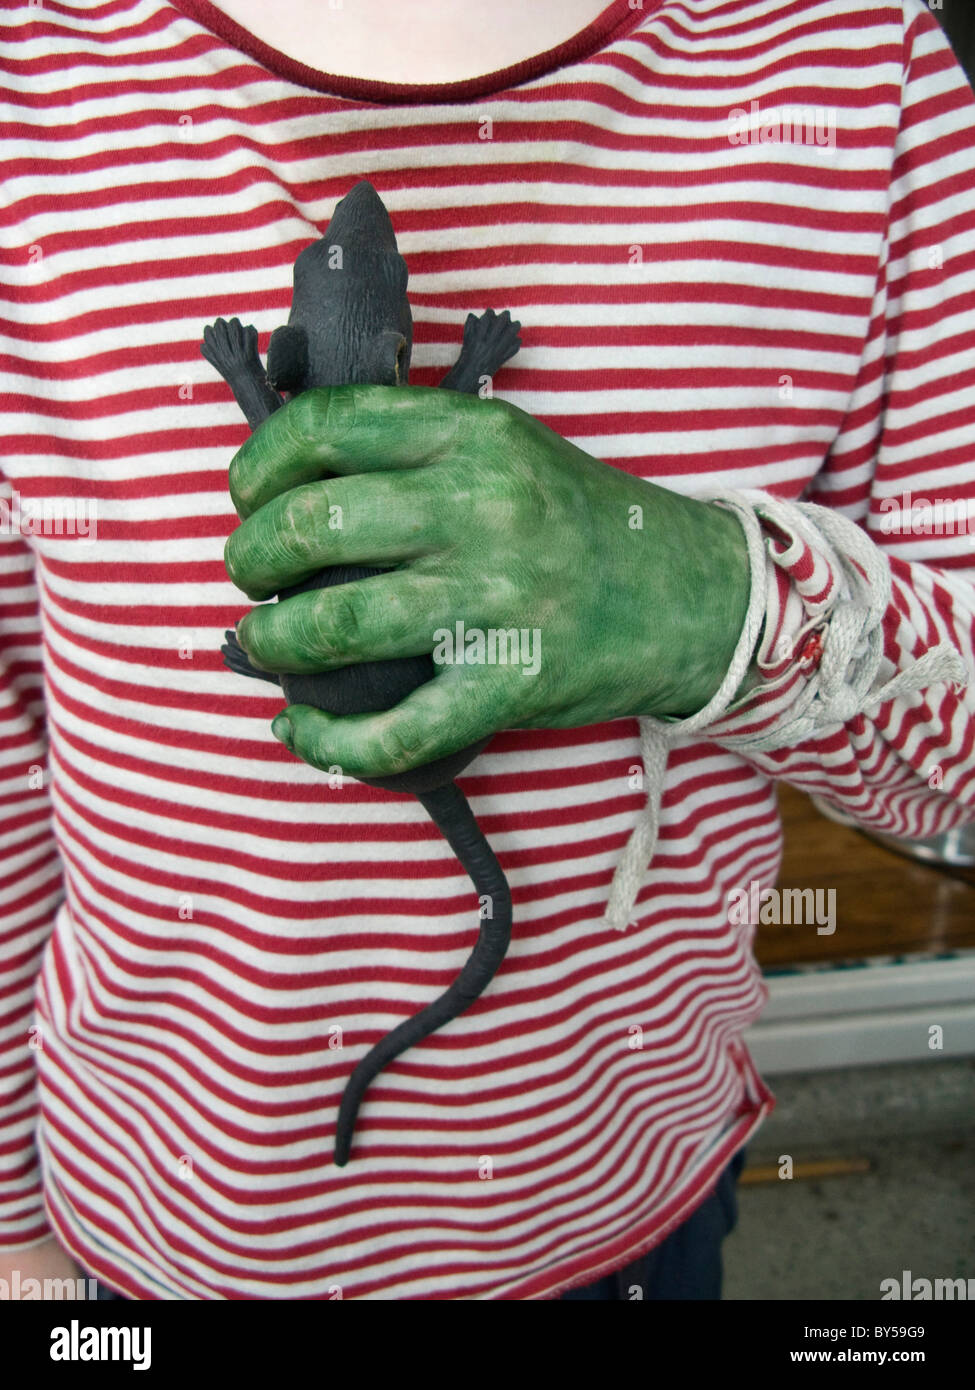 A person with a green hand holding a toy rat Stock Photo